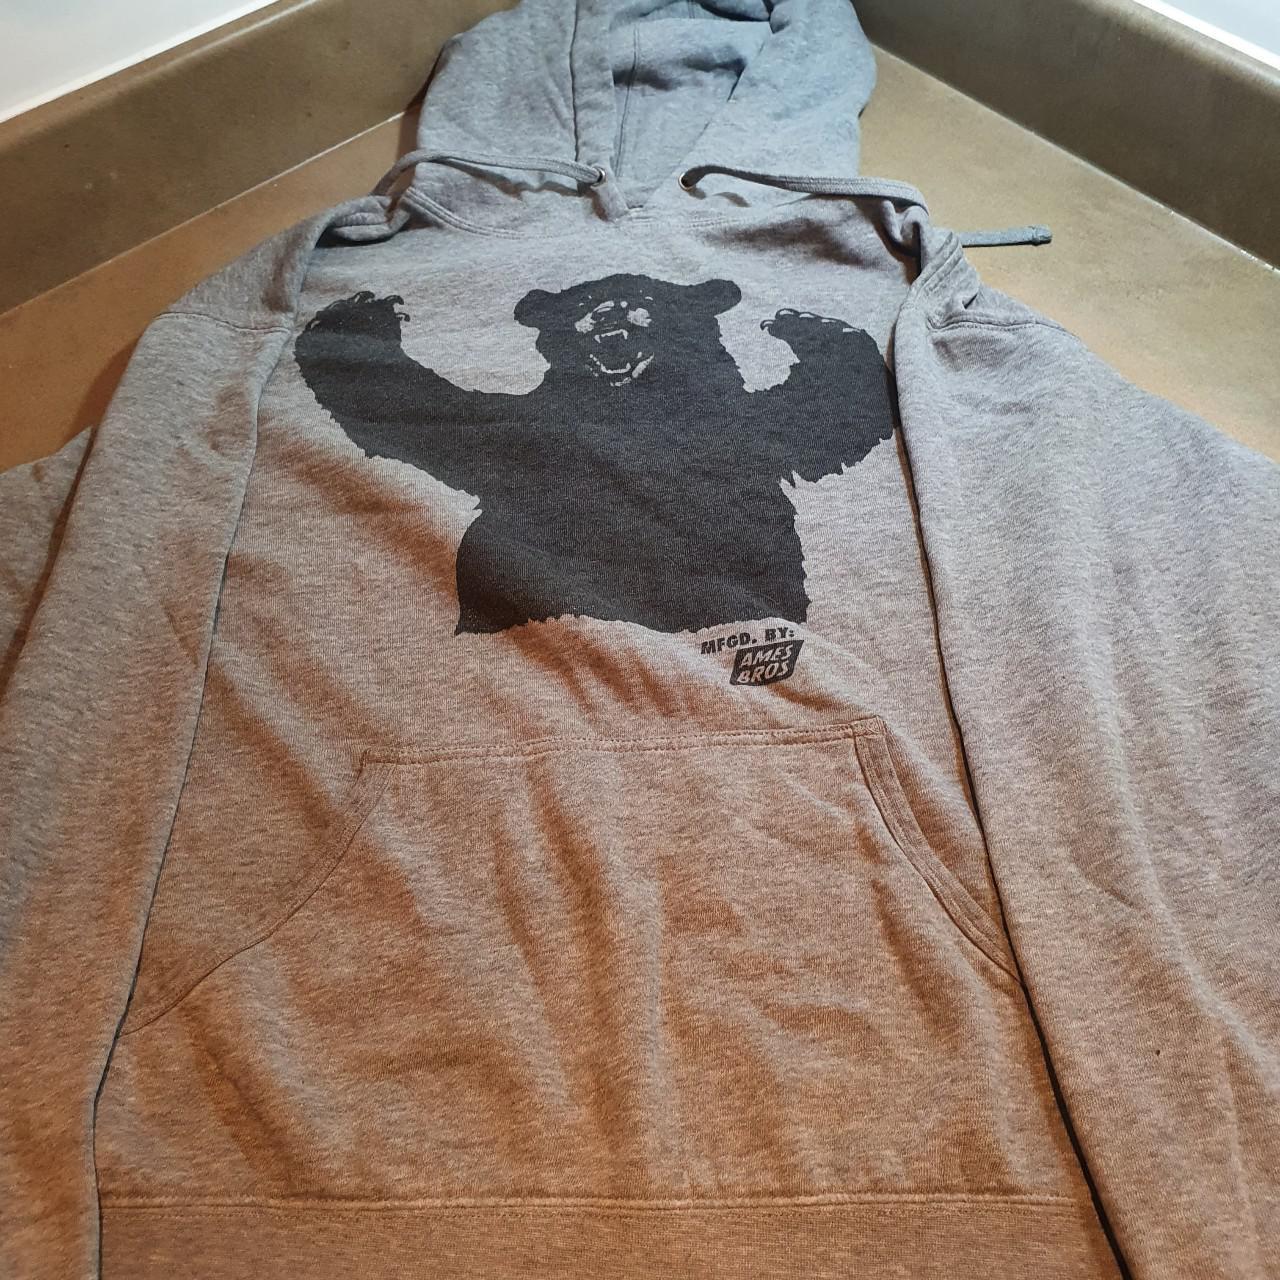 Product Image 1 - Hoodie I've had for a